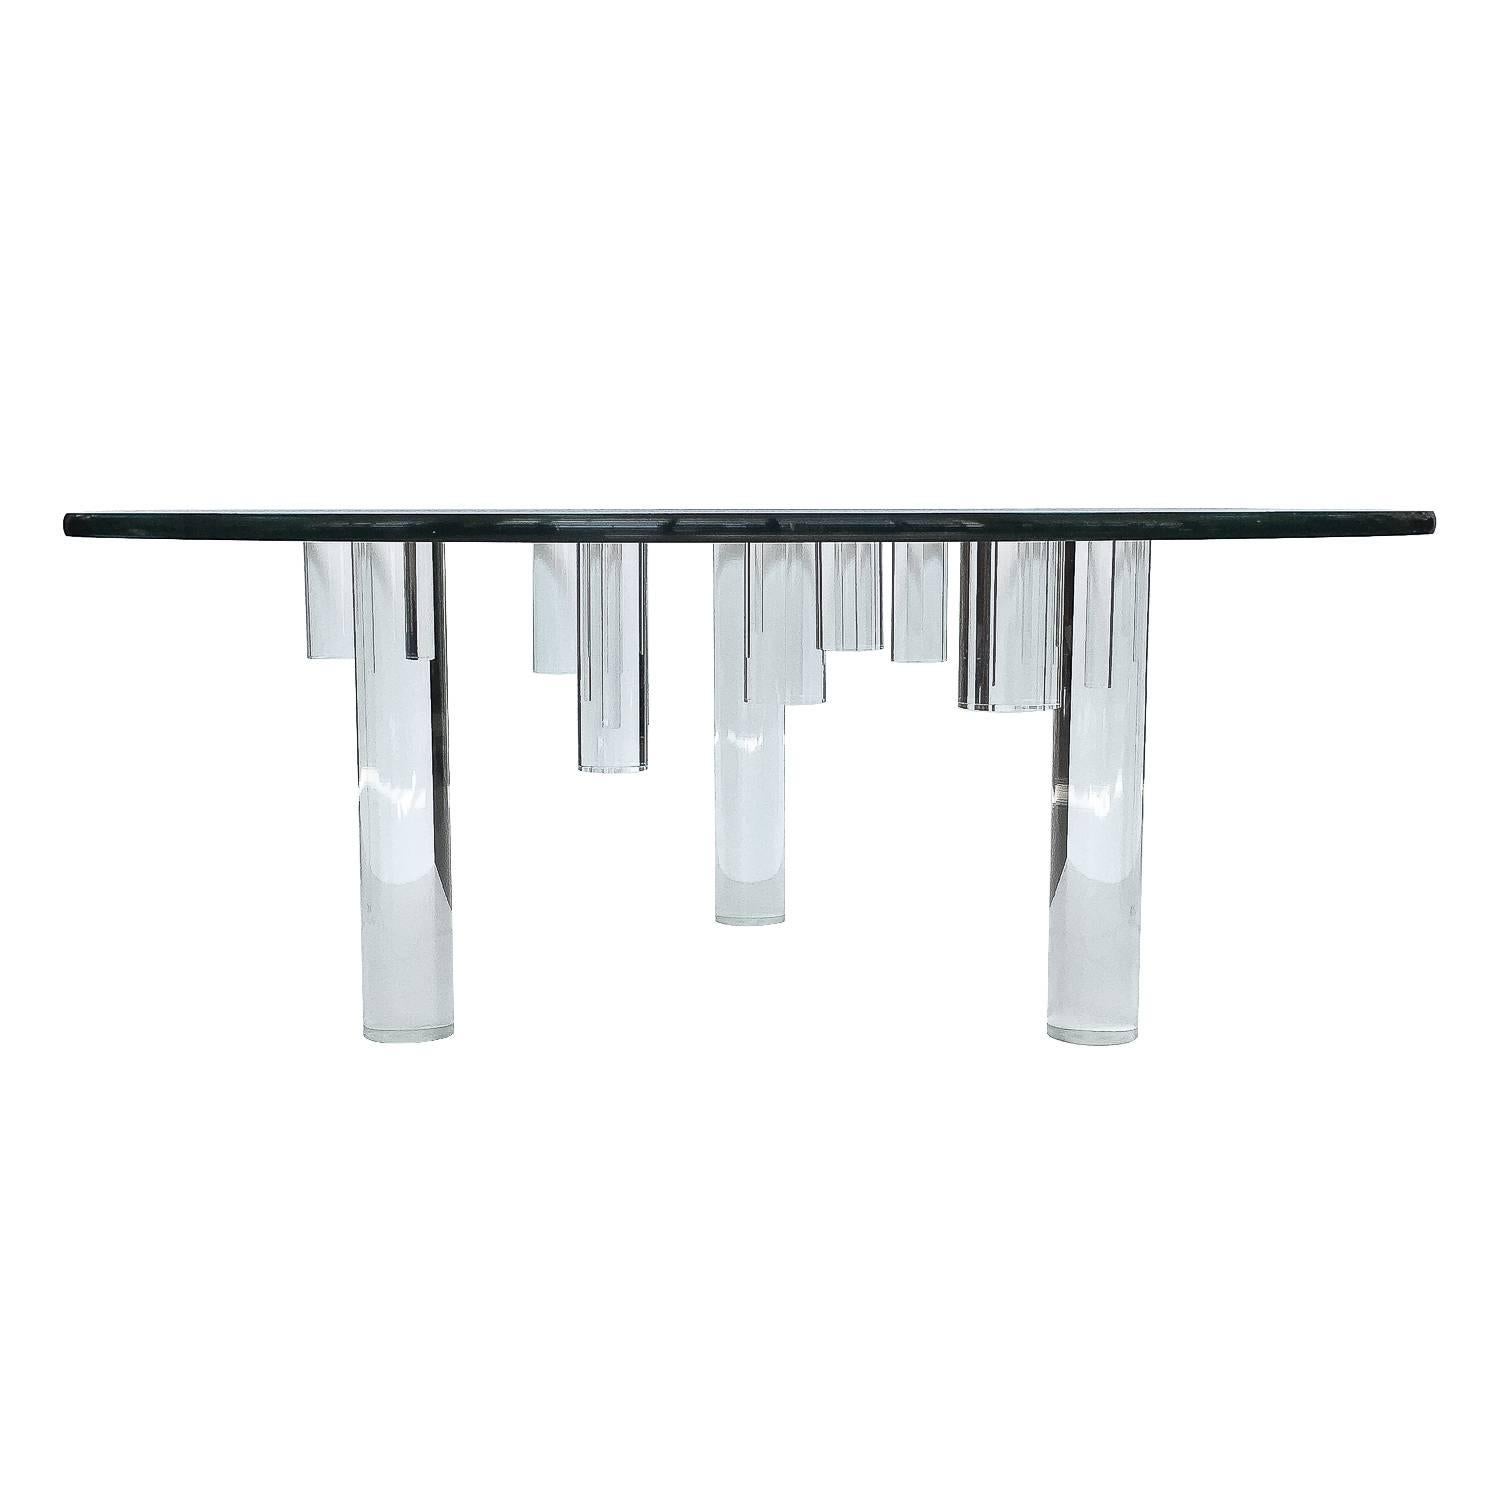 Unique sculptural Lucite coffee table with round glass top. This table features three clear Lucite cylinder legs and ten clear Lucite cylinders in various lengths that are all fused to the glass top. They hang like stalagmites from the underside of